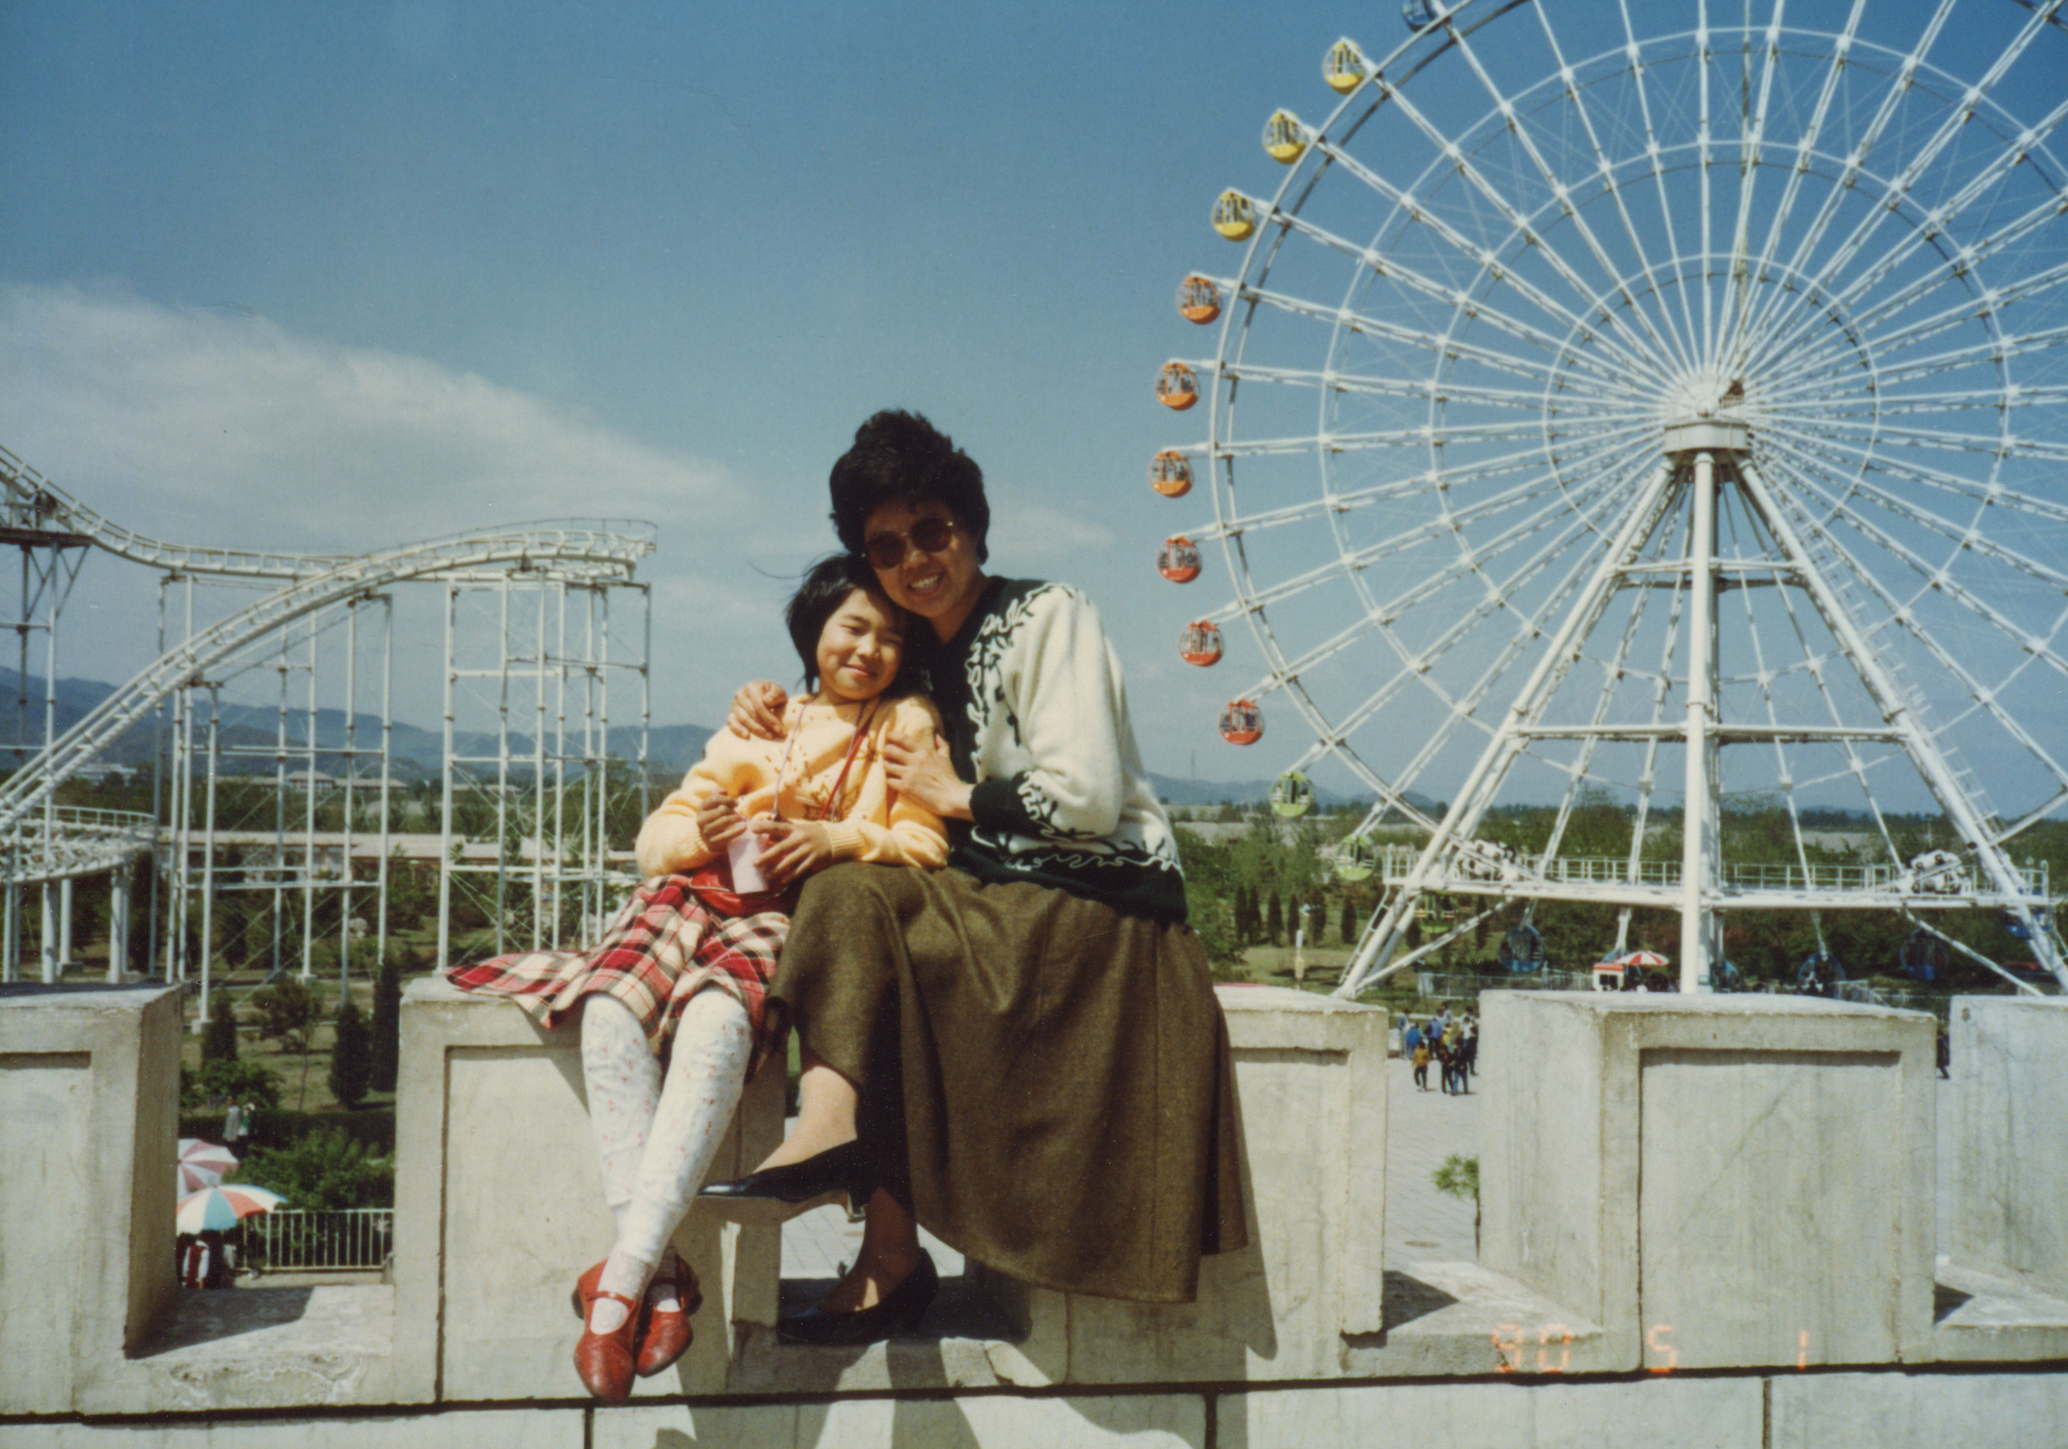 Parent and child smiling on a ledge with a Ferris wheel in the background. They exhibit a close bond